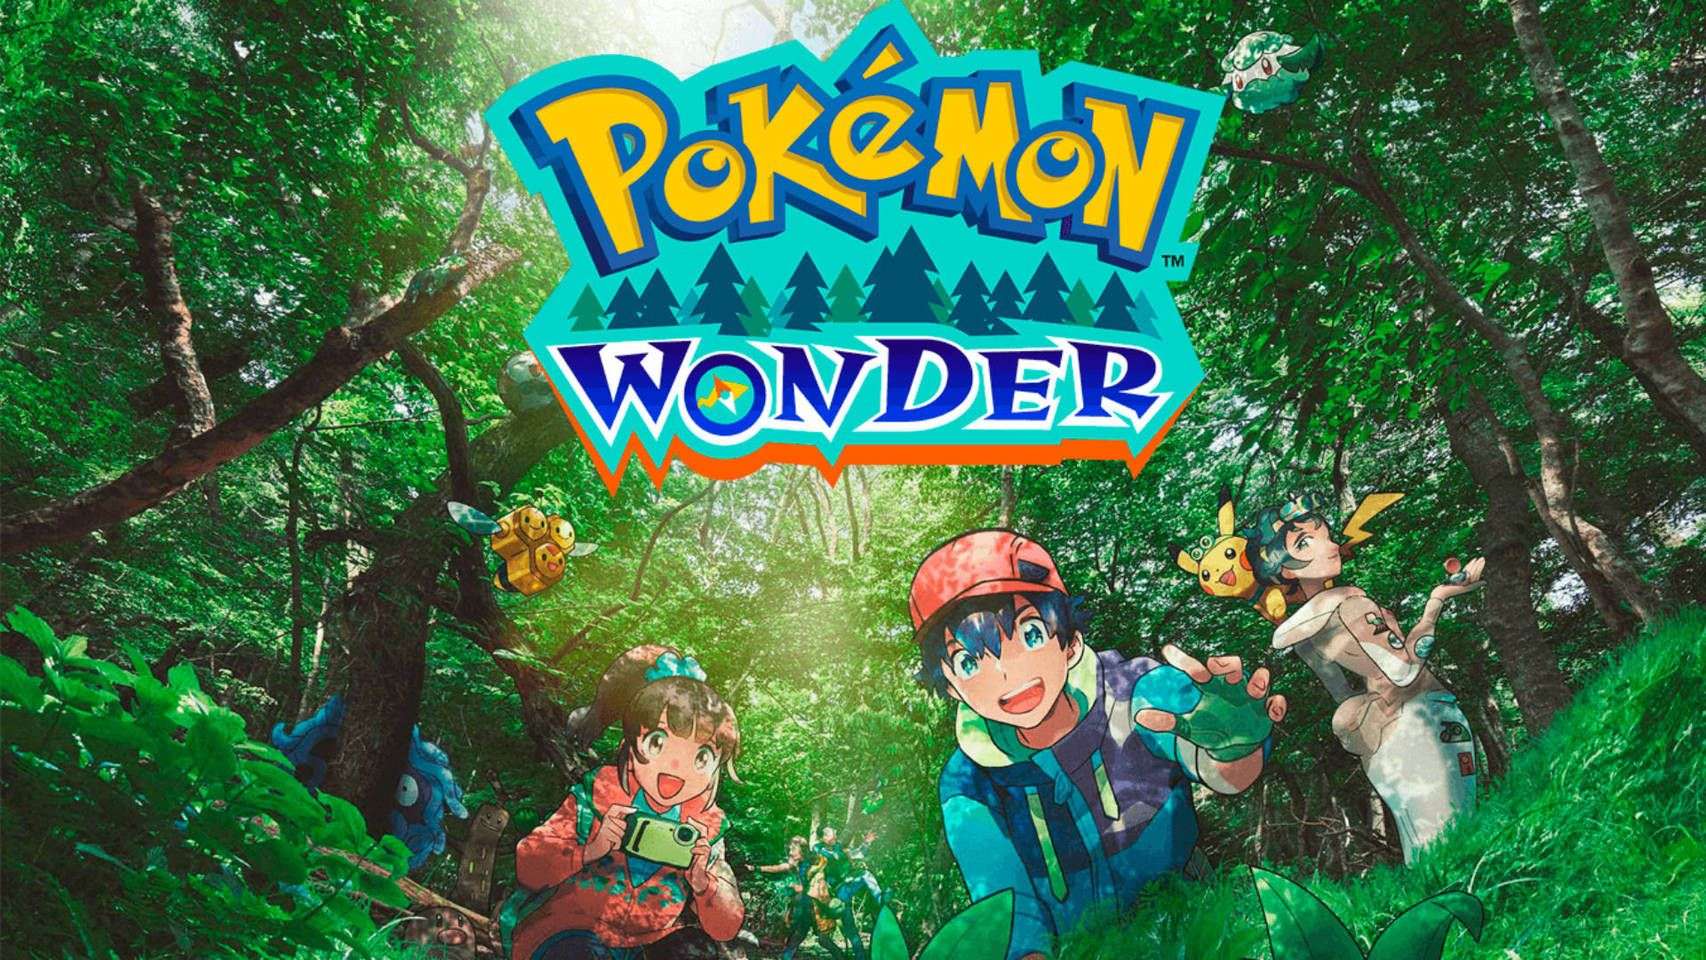 Pokémon Wonder theme park opens July 27 for a limited time Game